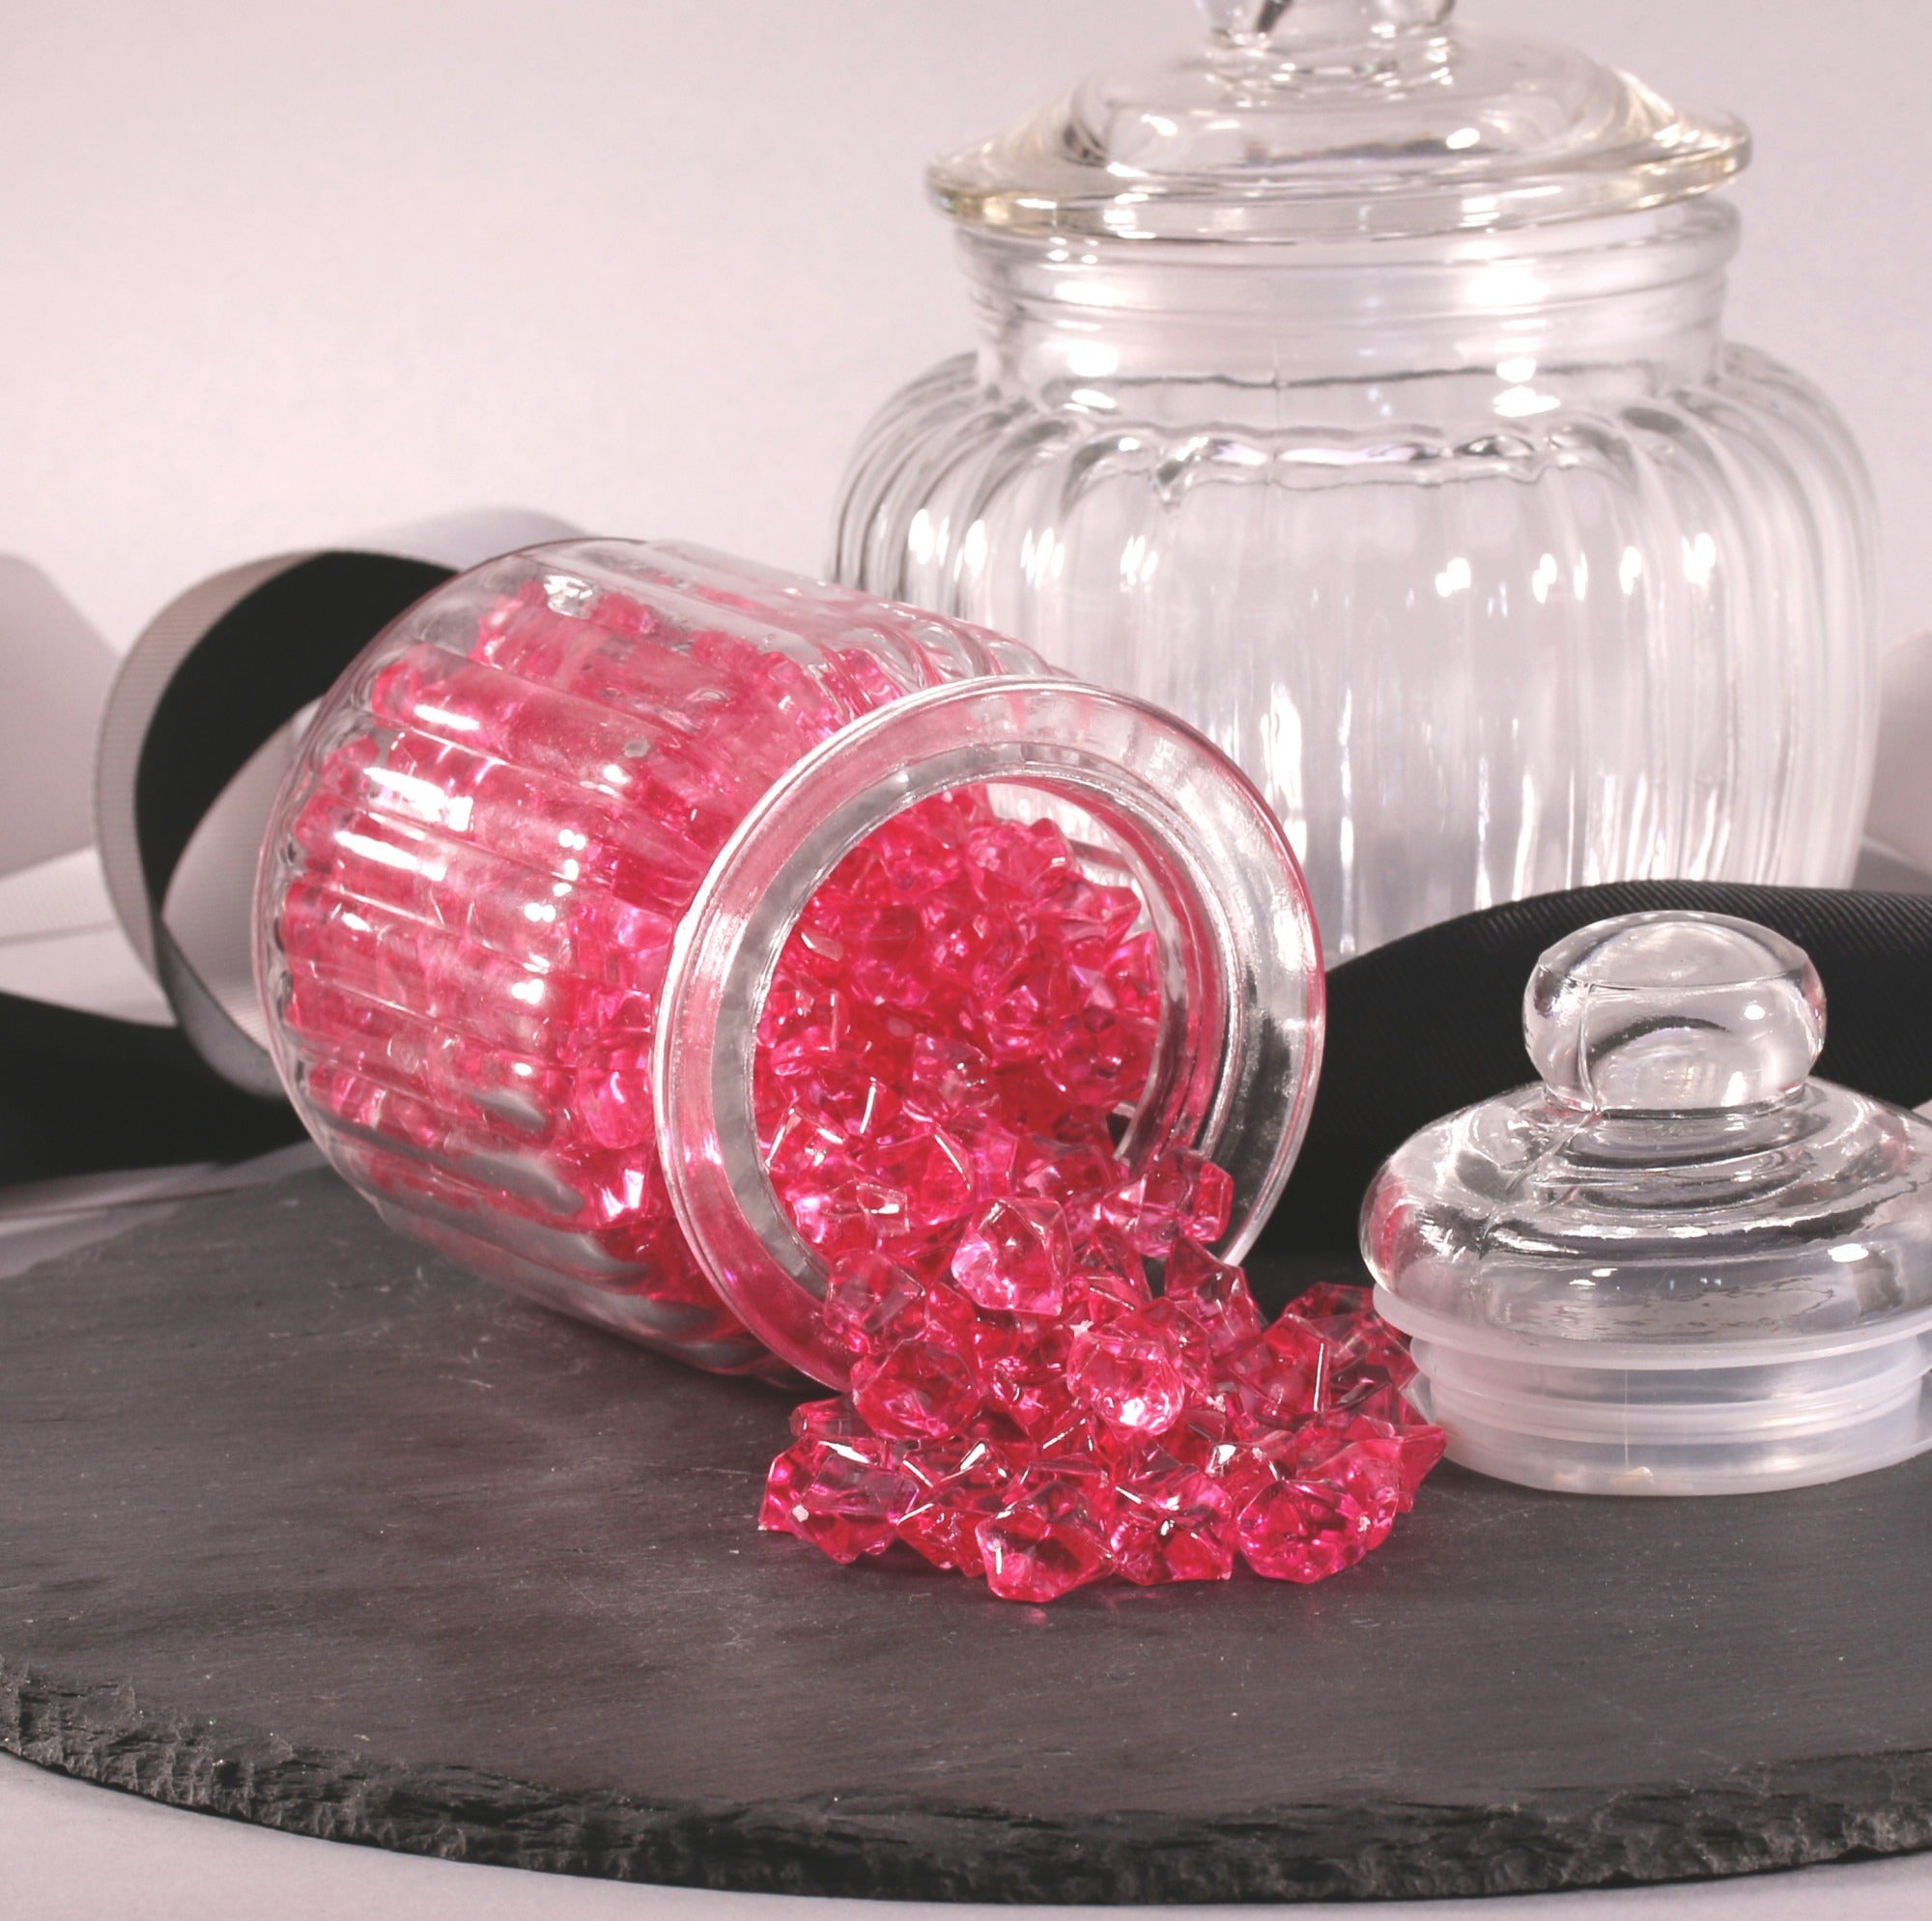 View 280 Gram Jar of Cerise Small Crystal Stones information